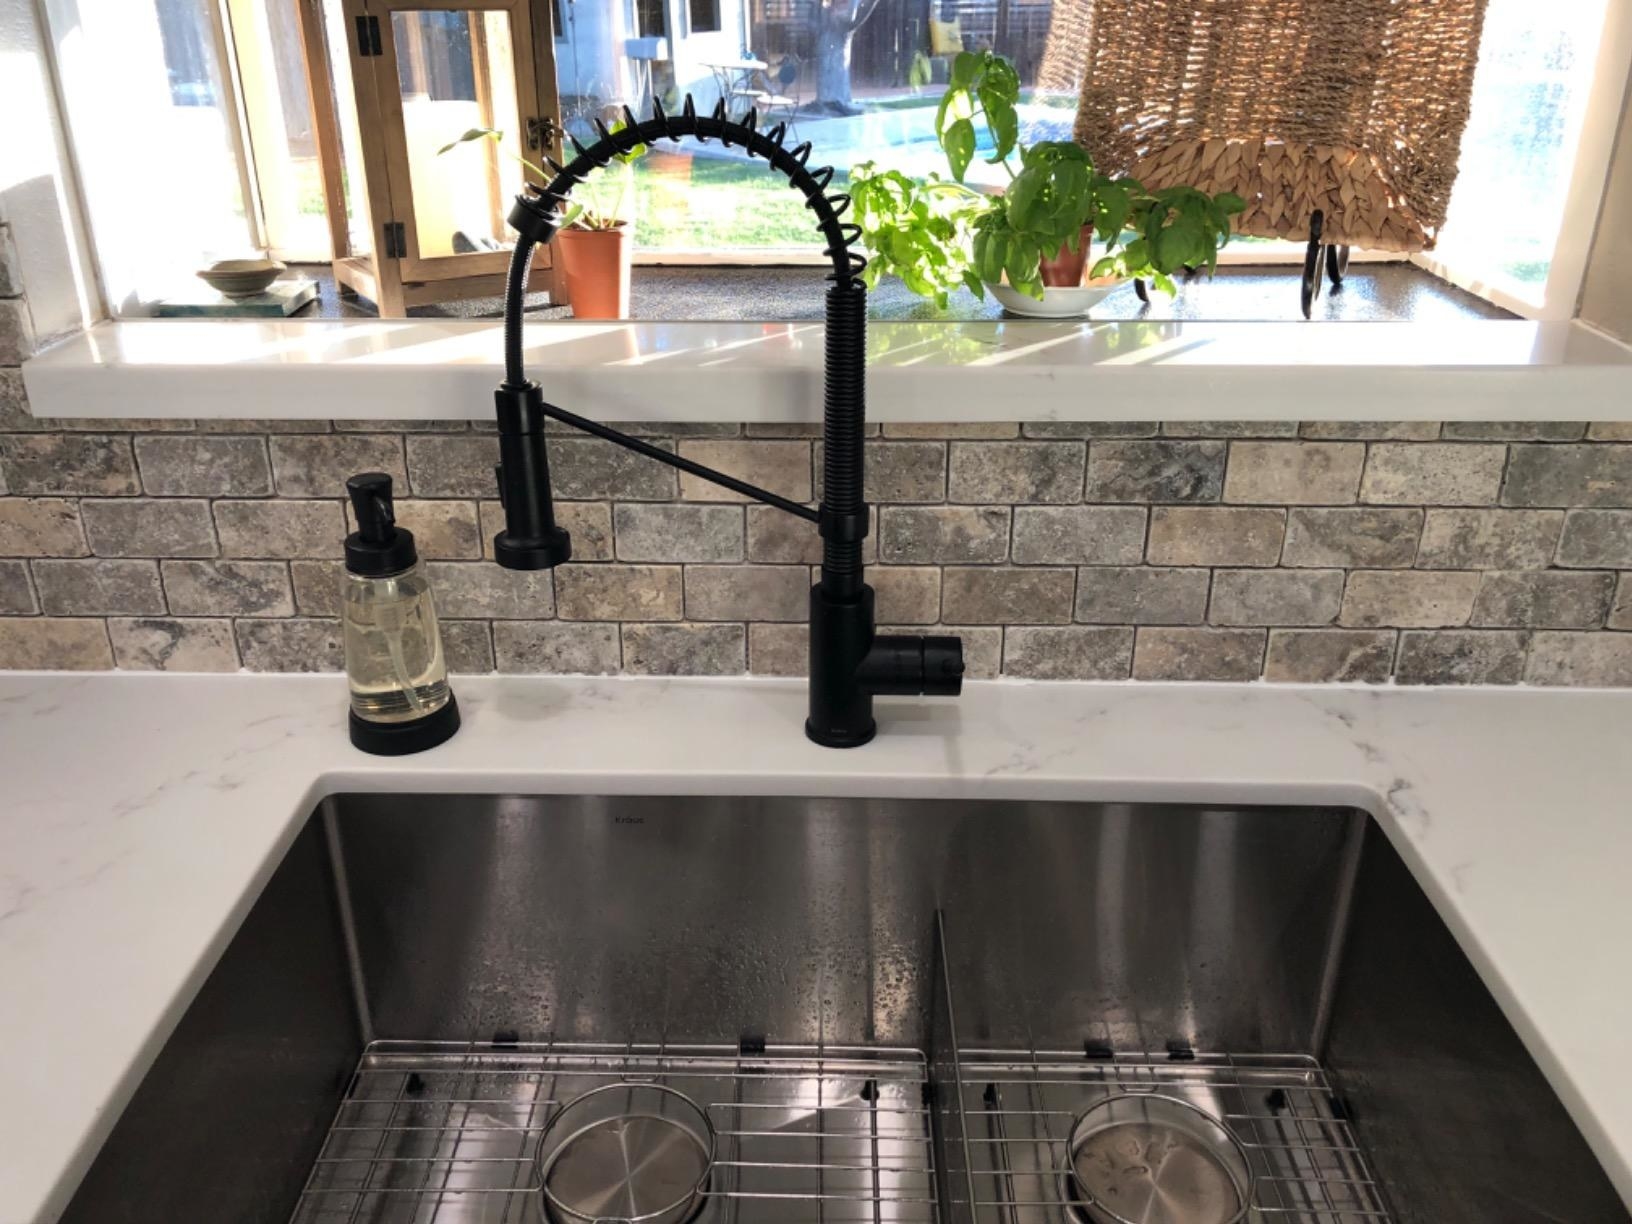 Reviewer image of black faucet in their kitchen